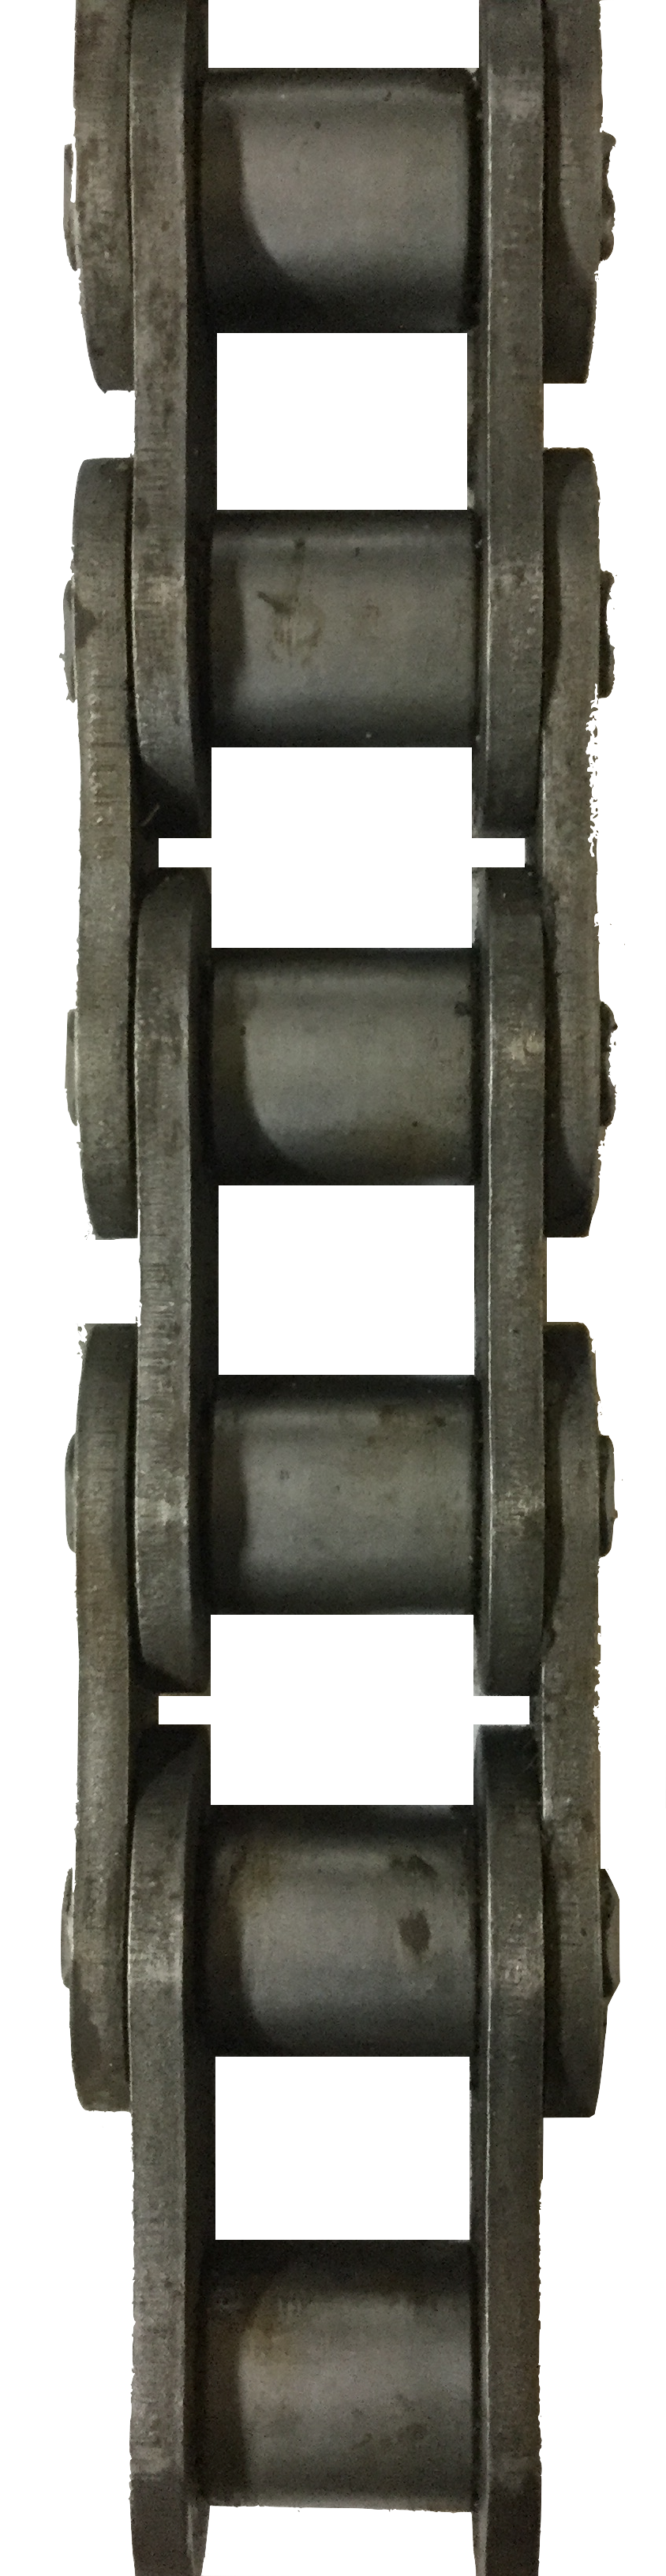 HKK #200 Standard Riveted Roller Chain (2.500" Pitch) - SOLD BY THE FOOT - Froedge Machine & Supply Co., Inc.